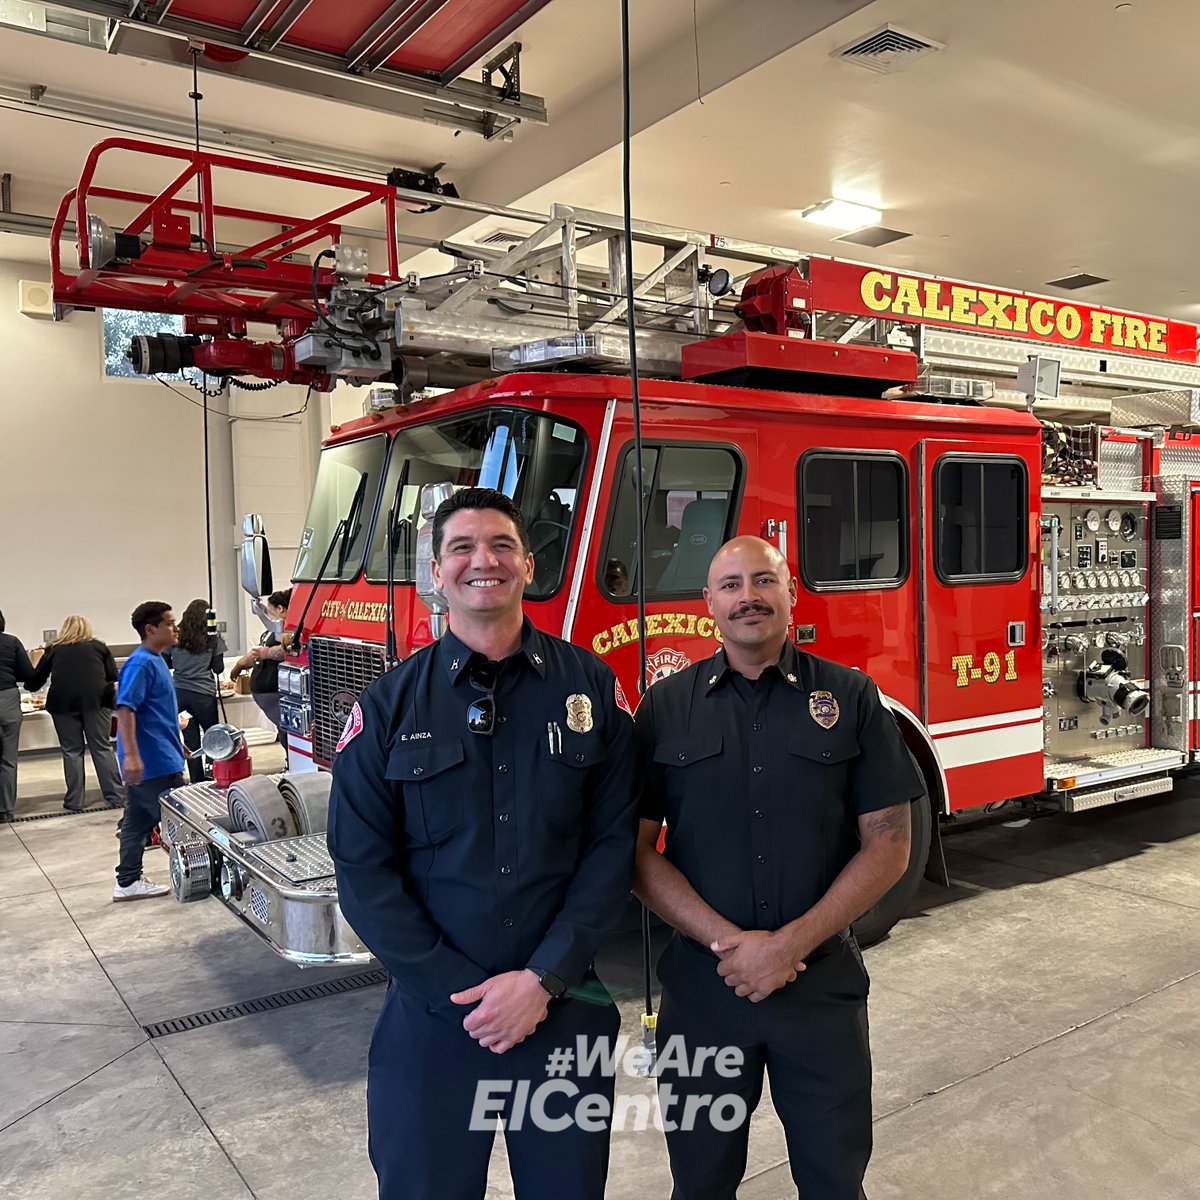 Congratulations to the City of Calexico Fire Department for your Station 1 Grand Opening recently. It's a beautiful station your community should be proud of. #WeAreElCentro